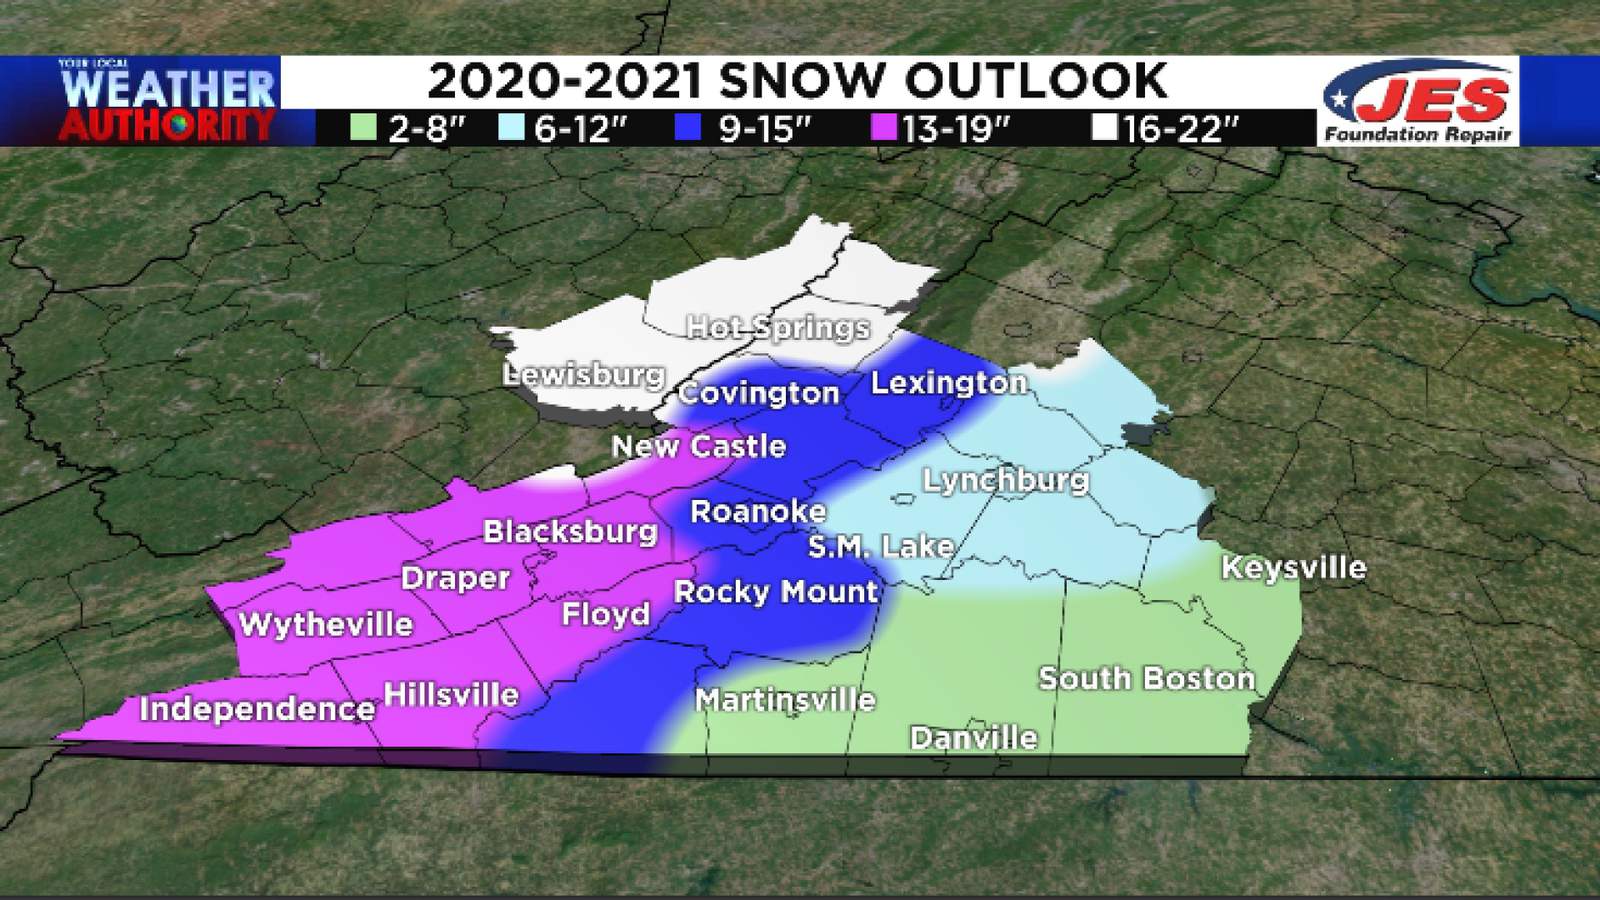 Sorry snow lovers, our 2020-2021 winter forecast calls for below-average snowfall